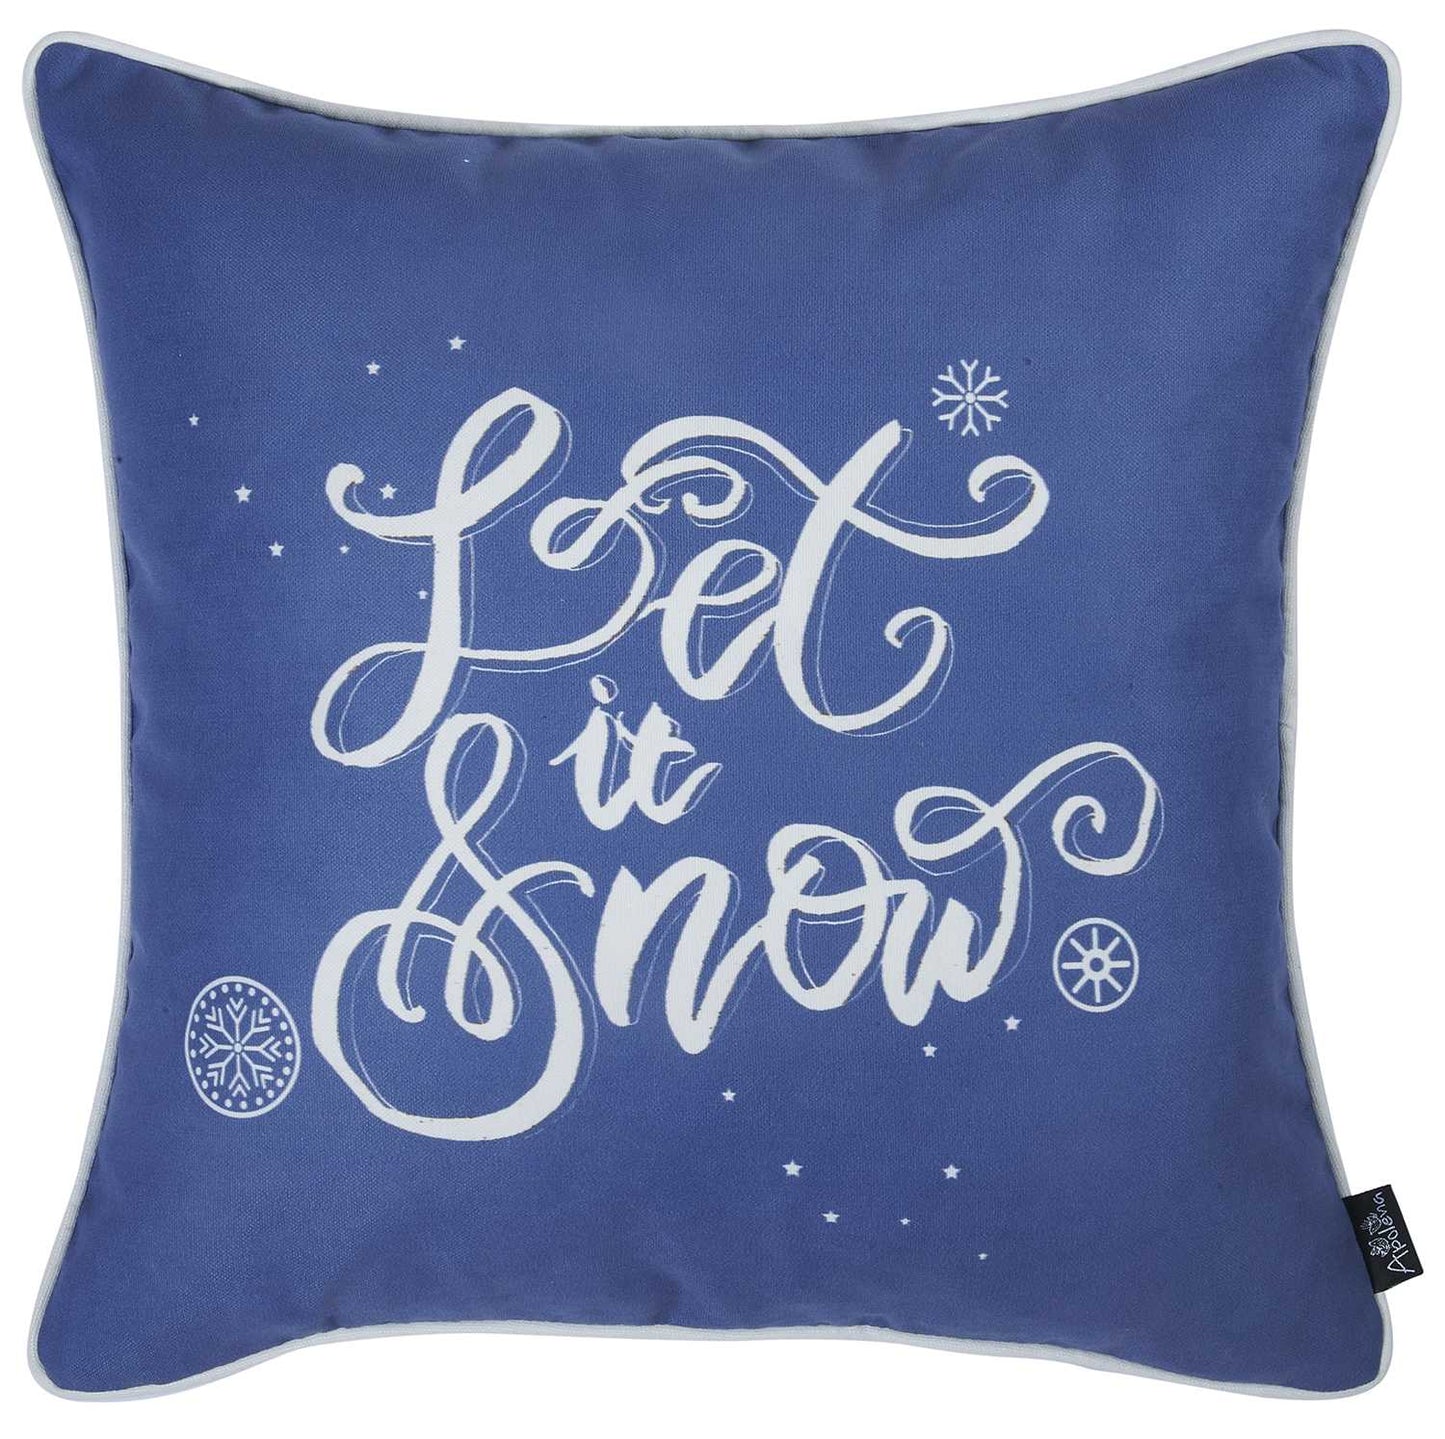 18"x18" Christmas Quote Printed Decorative Throw Pillow Cover